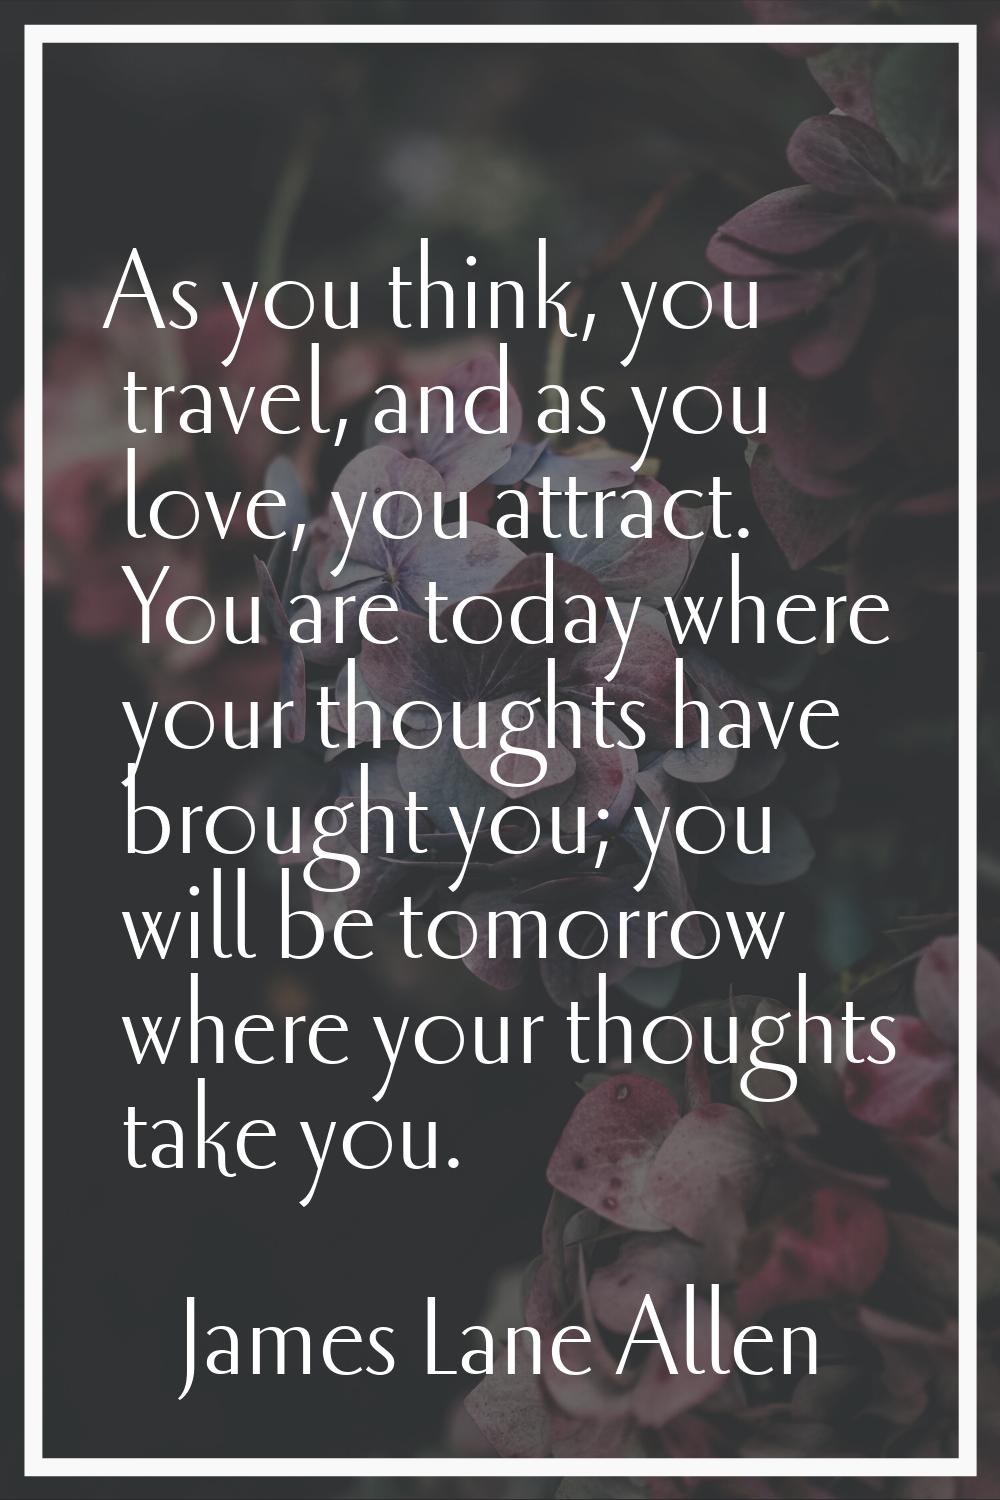 As you think, you travel, and as you love, you attract. You are today where your thoughts have brou